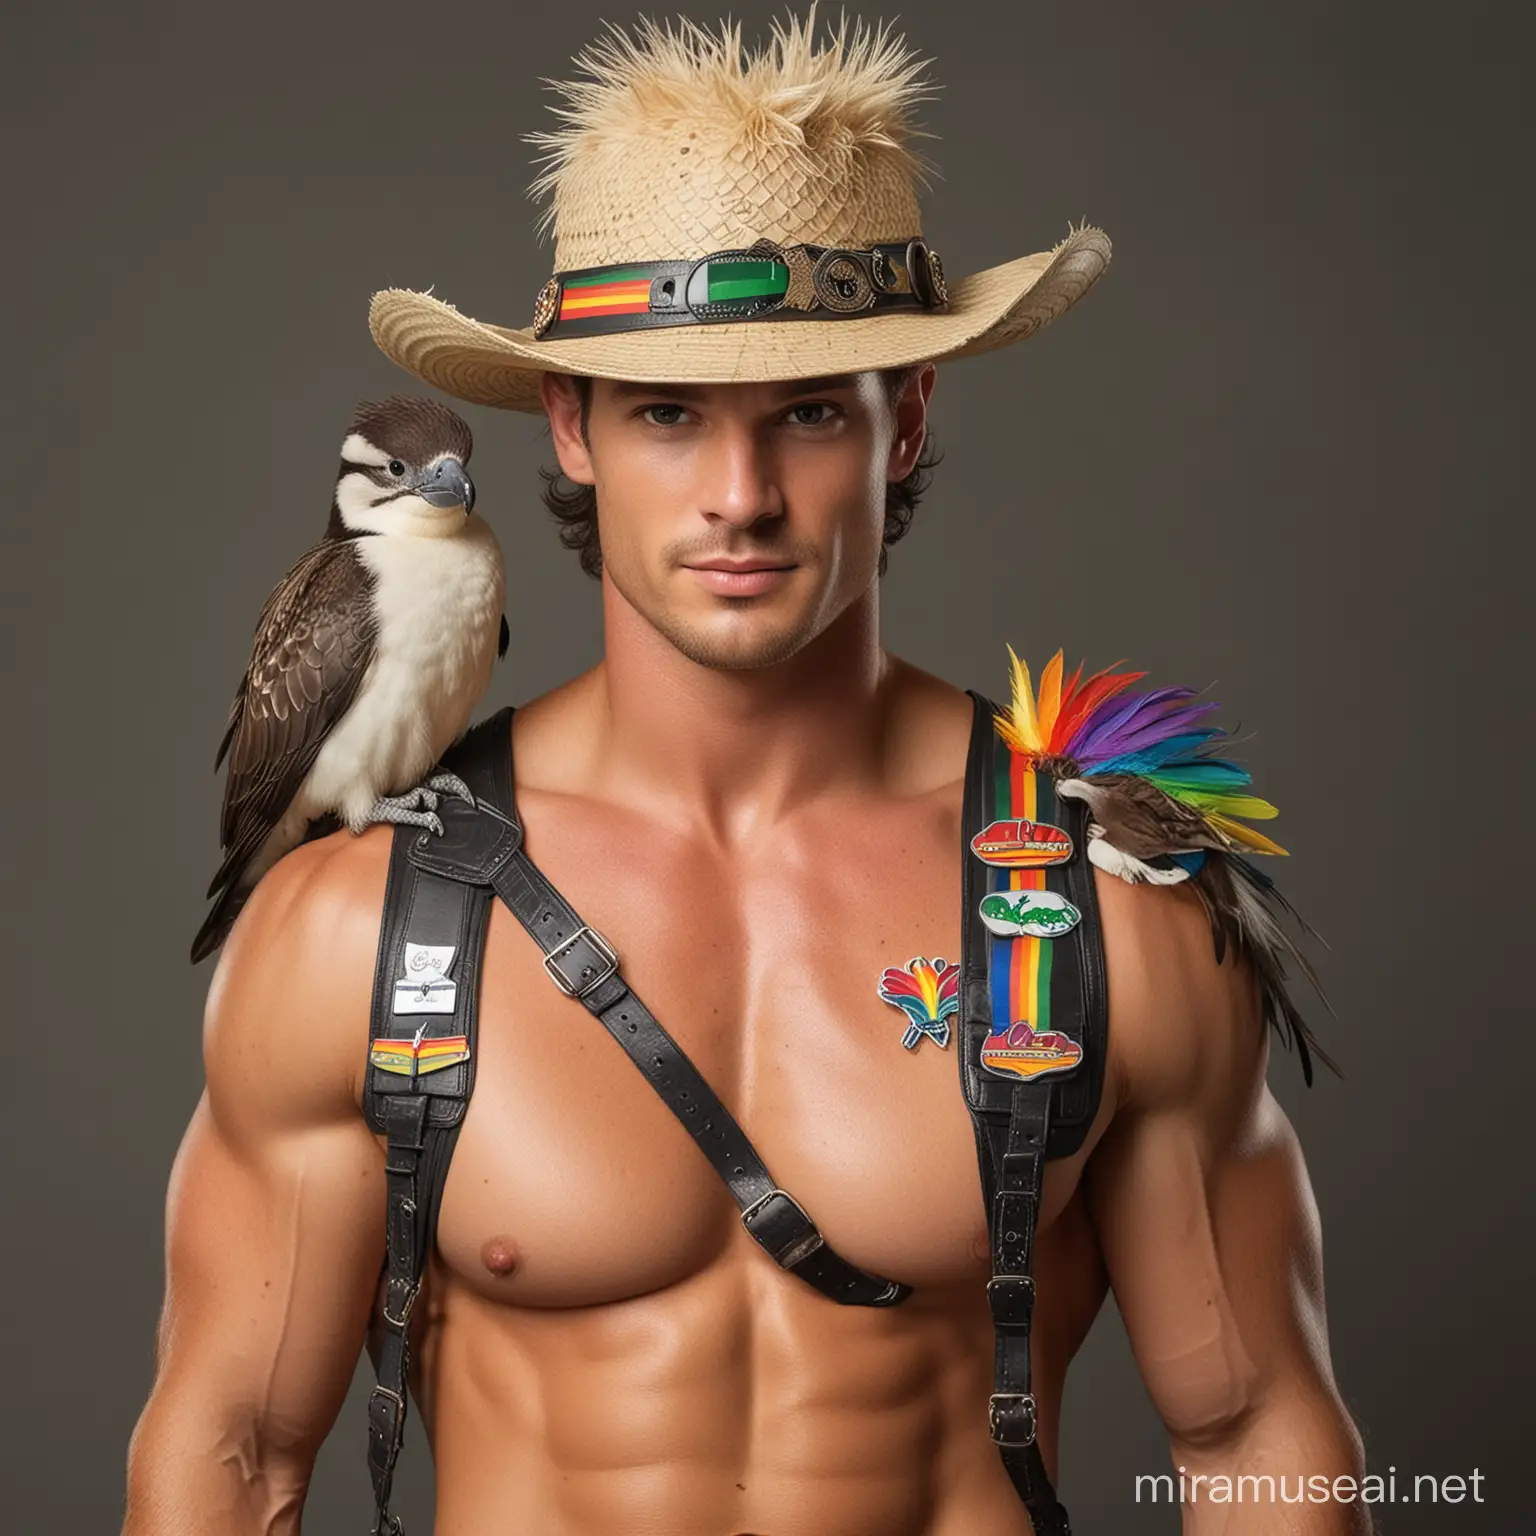 Ruggedly Handsome Man in Crocodile Dundeeinspired Outfit with Vibrant Badges and Kookaburra Companion